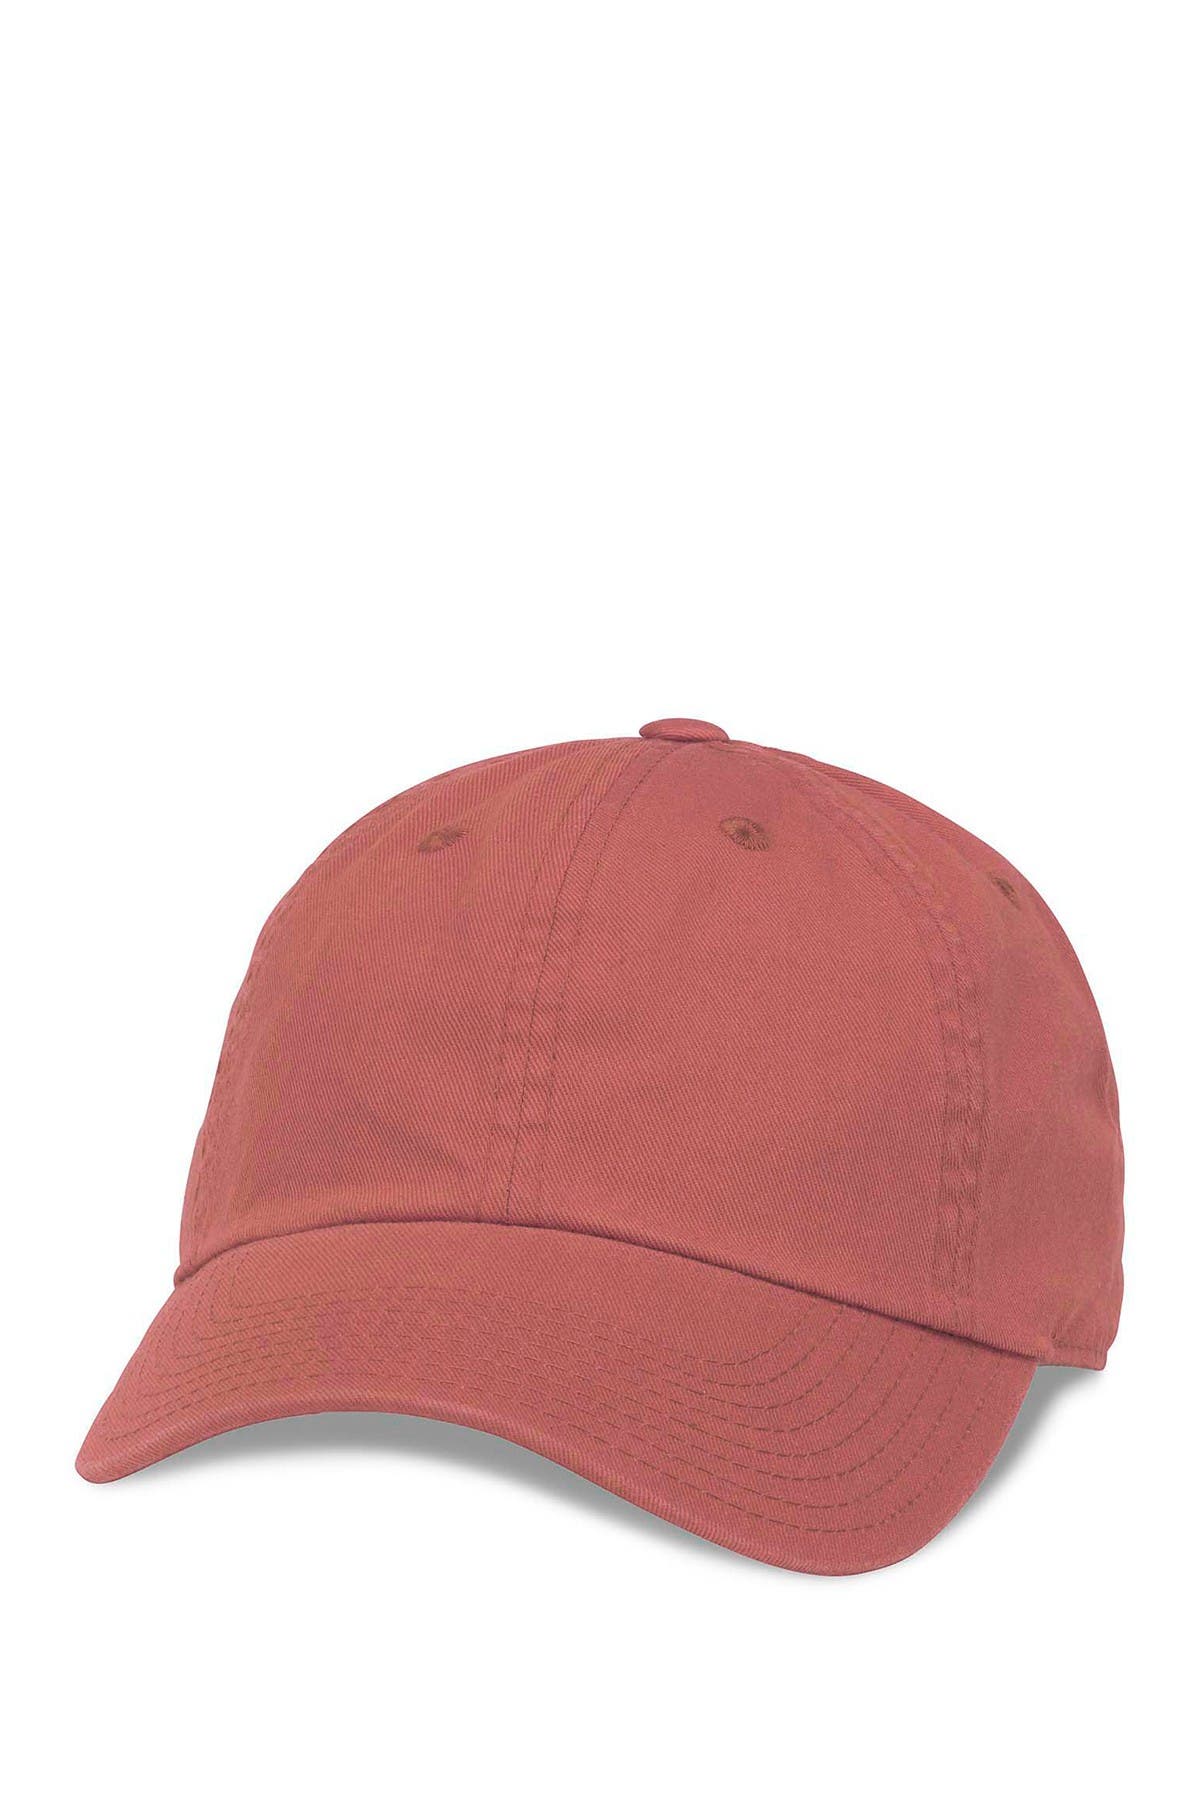 American Needle Washed Slouch Baseball Cap In Nantucket Red